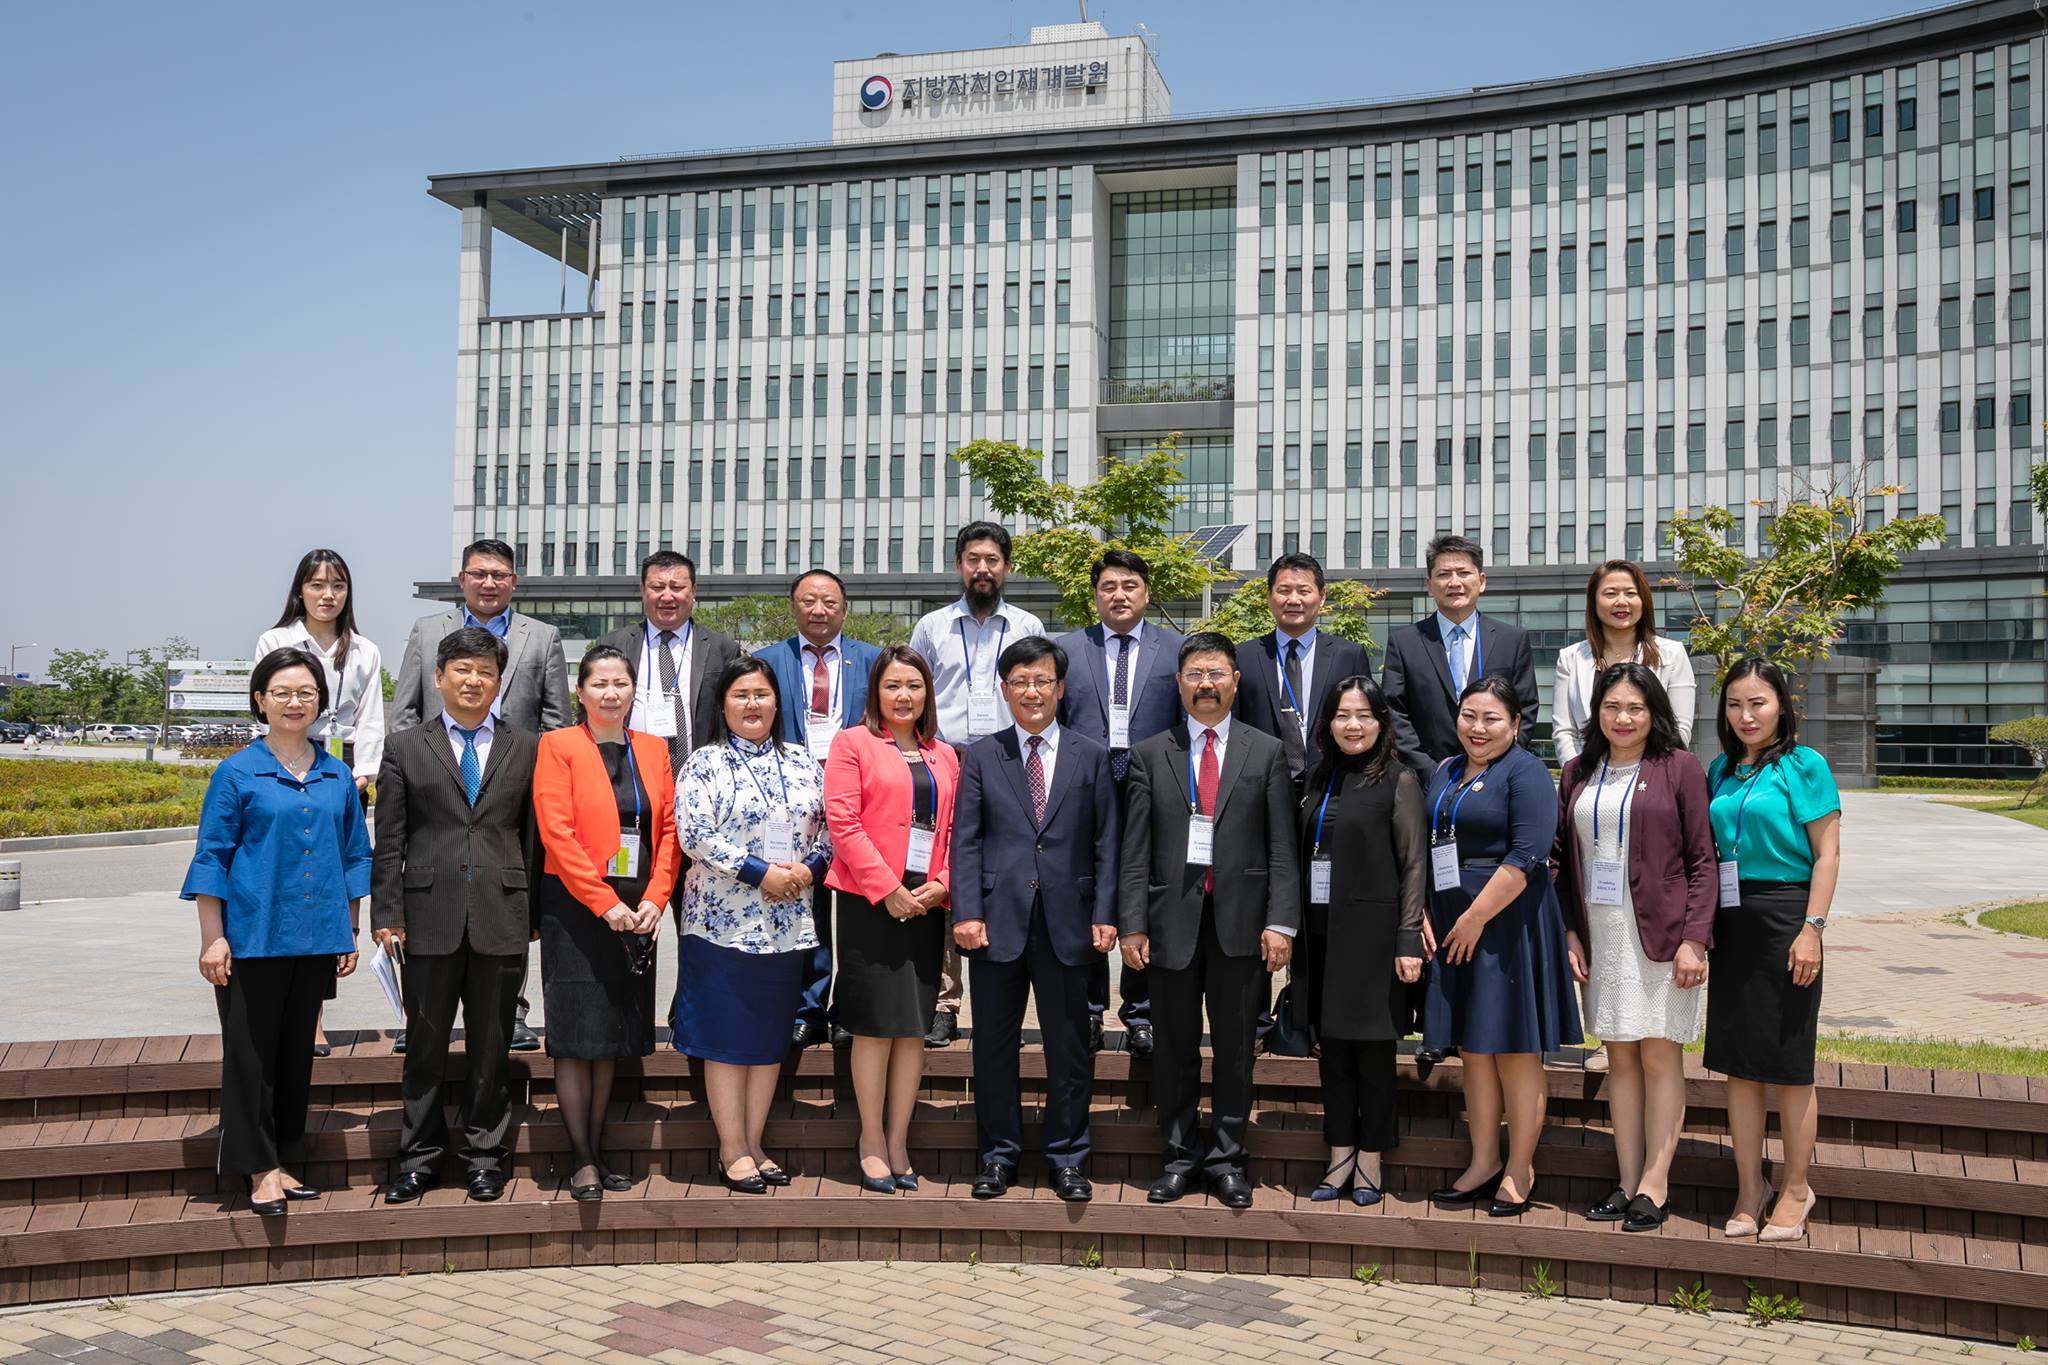 Study visit by Mongolian faculty members and senior officials starts strong 큰 이미지[마우스 클릭 시 창닫기]